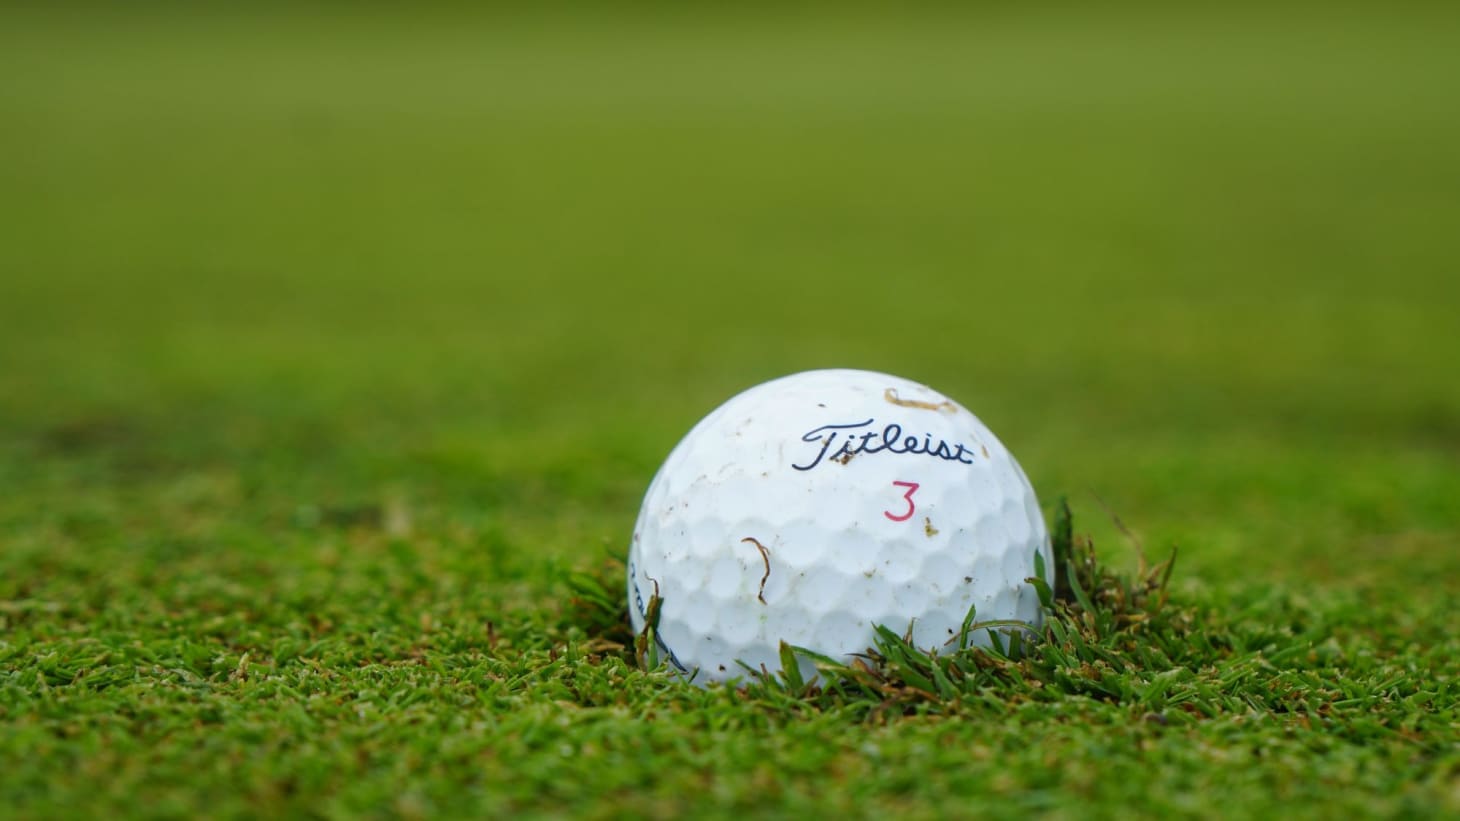 Zurich Classic of New Orleans - PGA Tour - Watch it live here